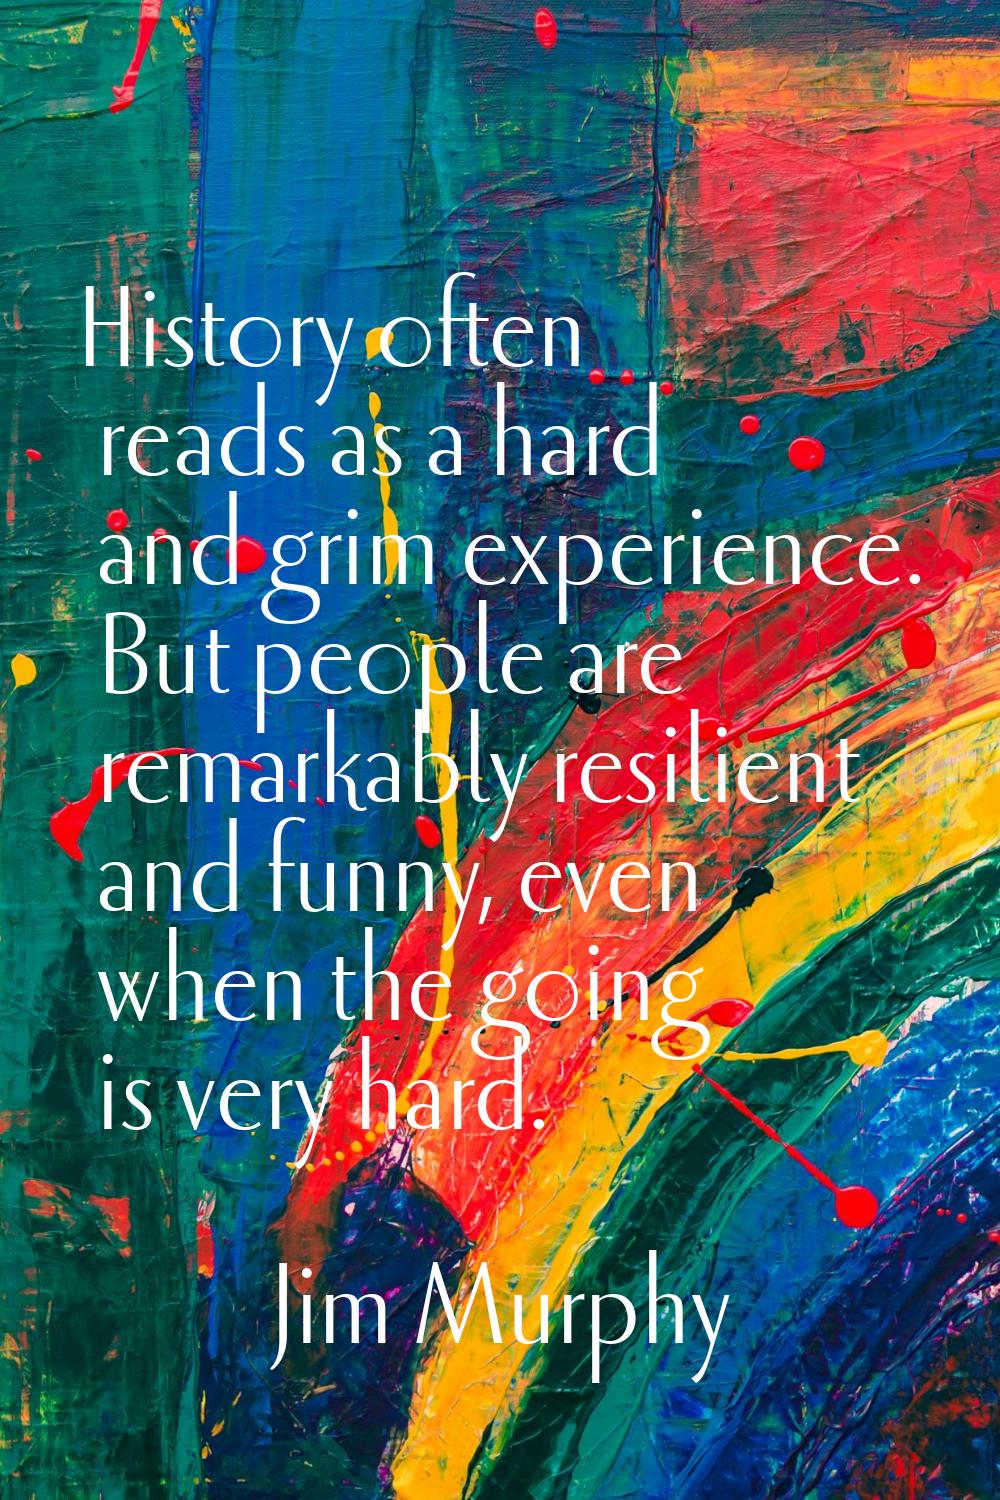 History often reads as a hard and grim experience. But people are remarkably resilient and funny, e